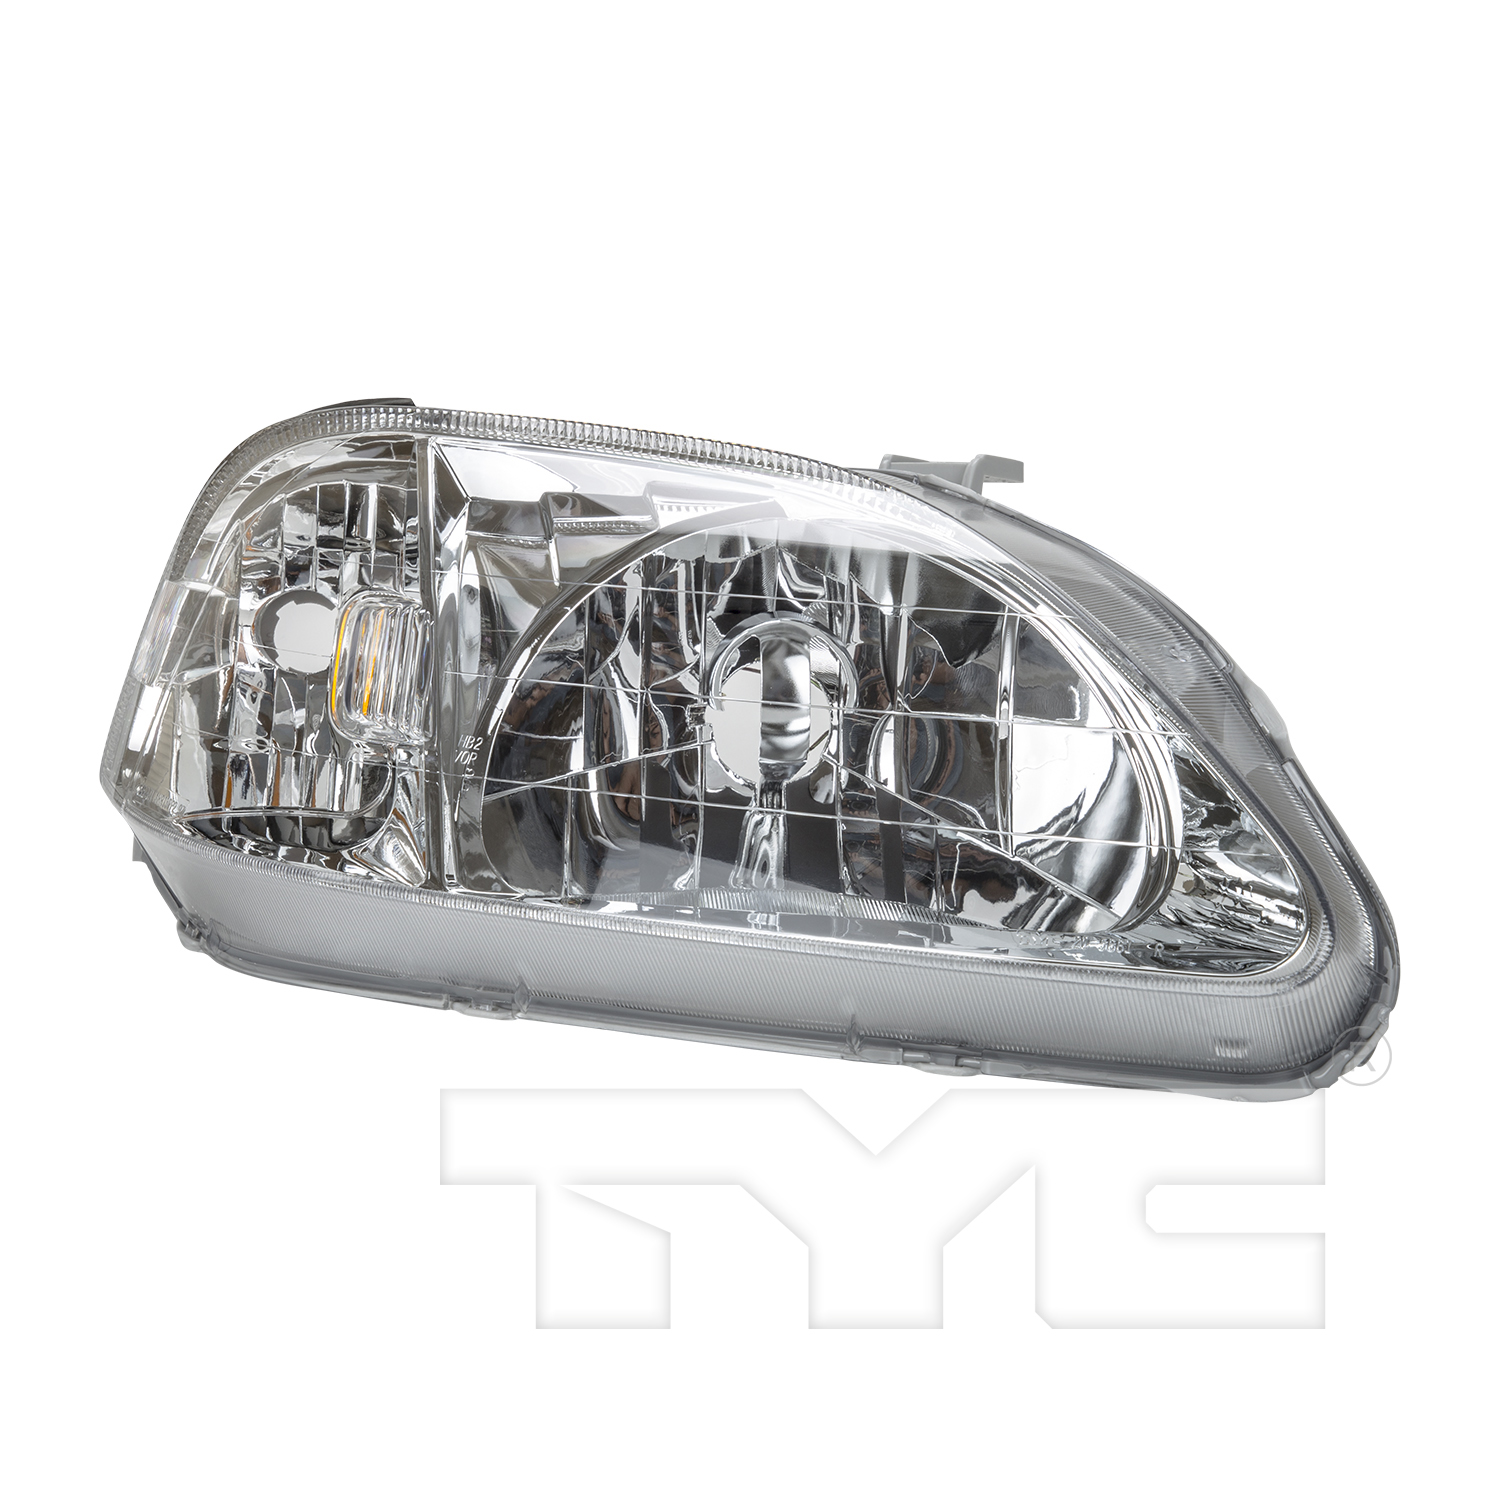 Aftermarket HEADLIGHTS for HONDA - CIVIC, CIVIC,99-00,RT Headlamp assy composite